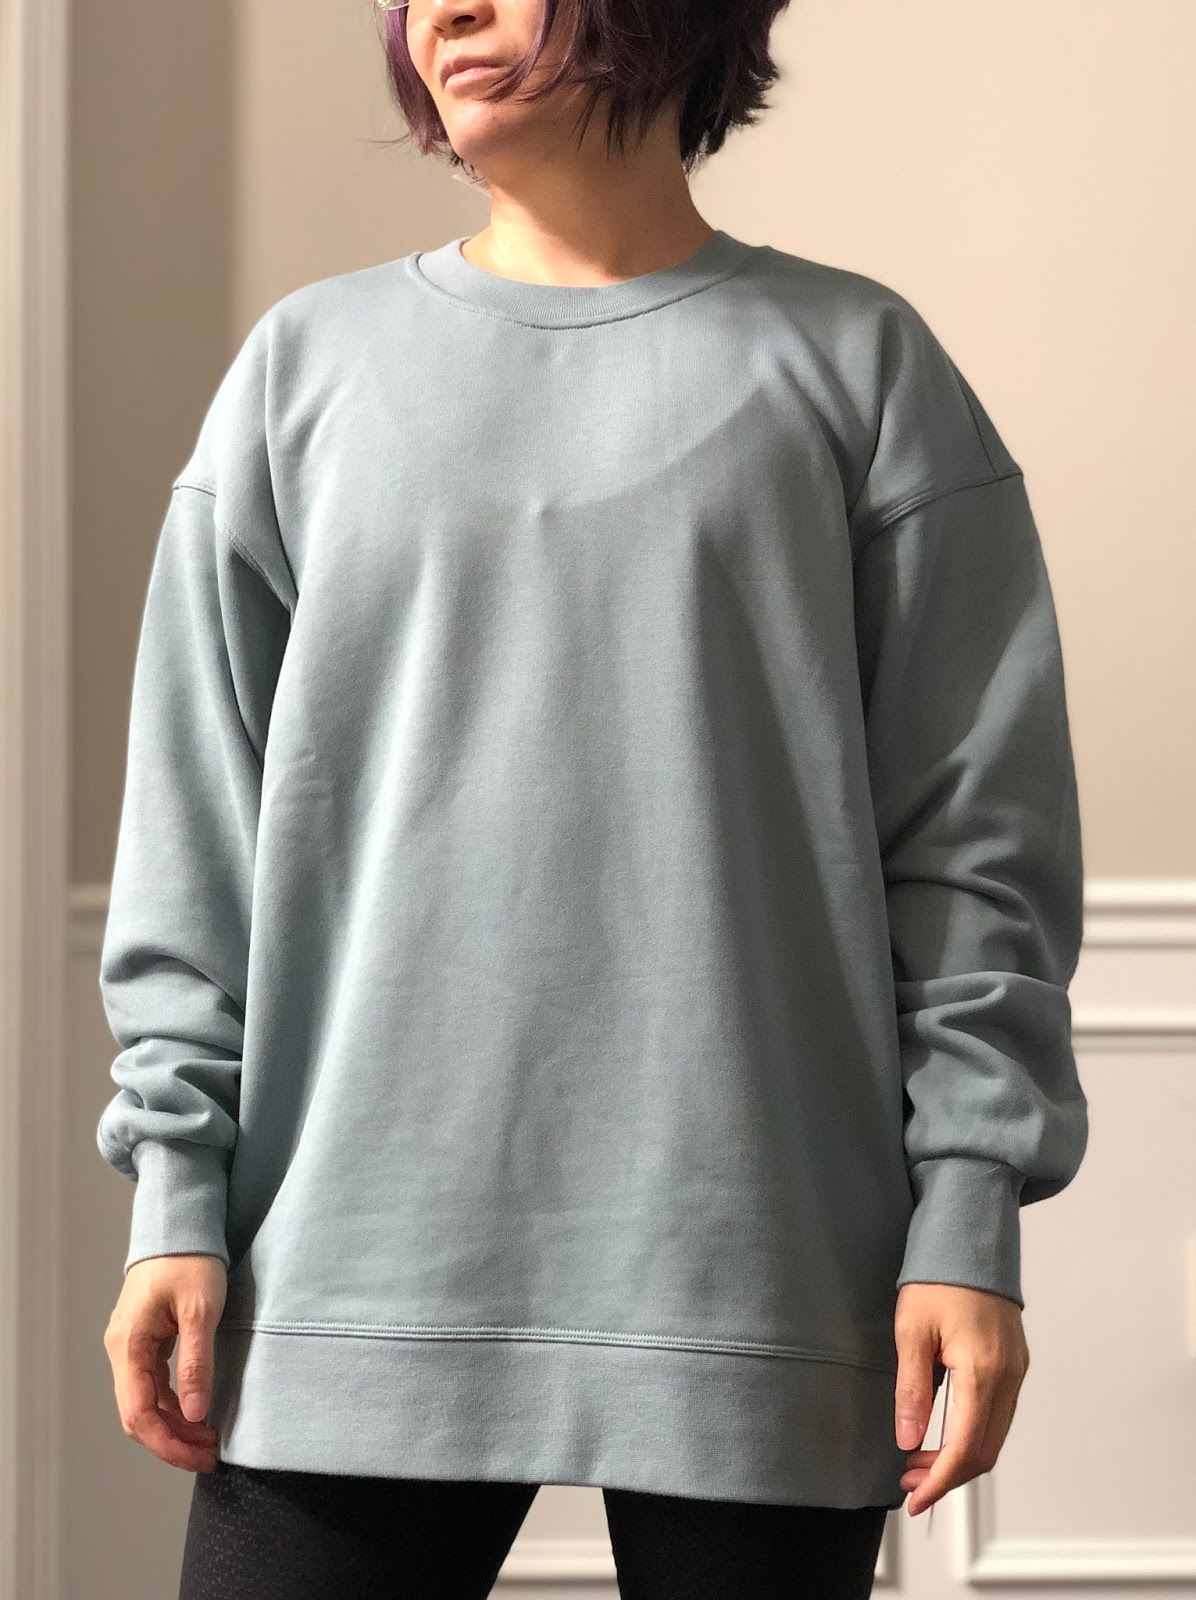 Fit Review! Perfectly Oversized Crew Blue Cast